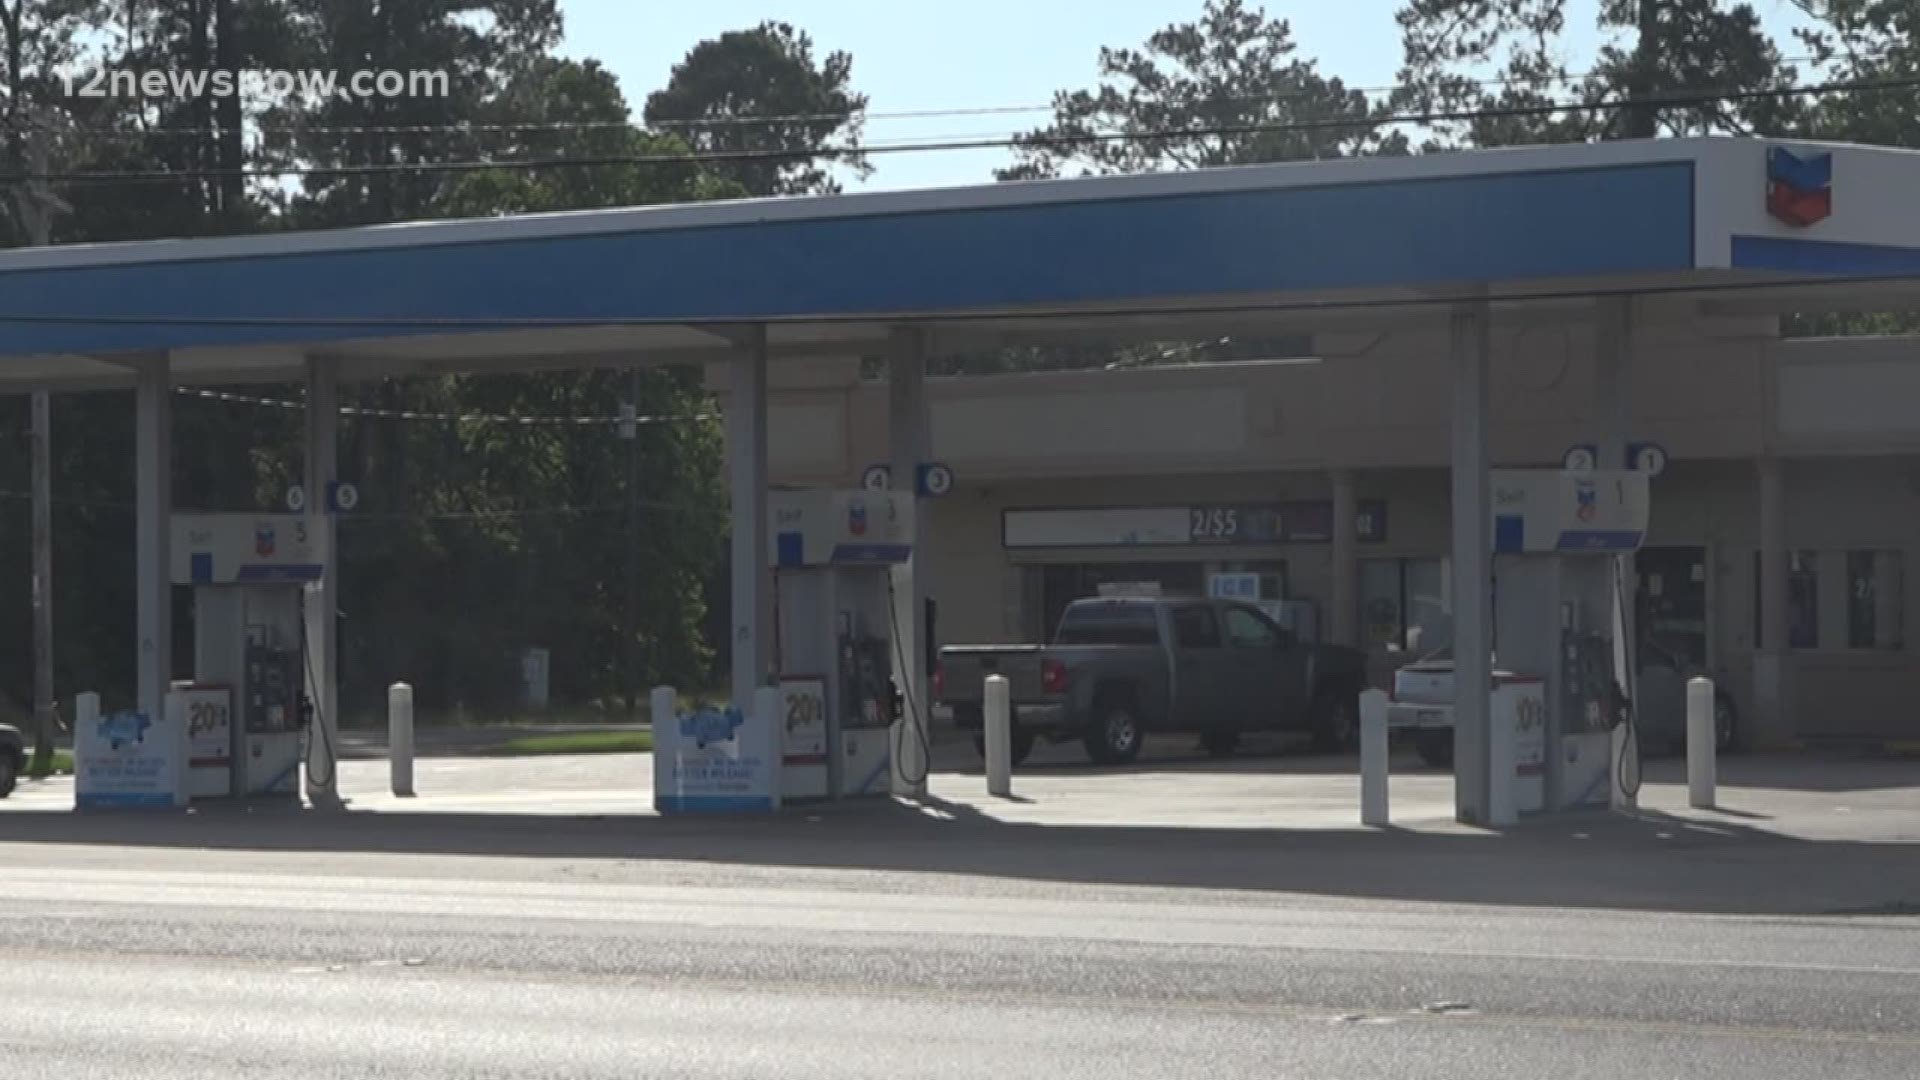 He says he filled his family's SUV at pump five at the Chevron at the corner of FM 1132 and Highway 12.